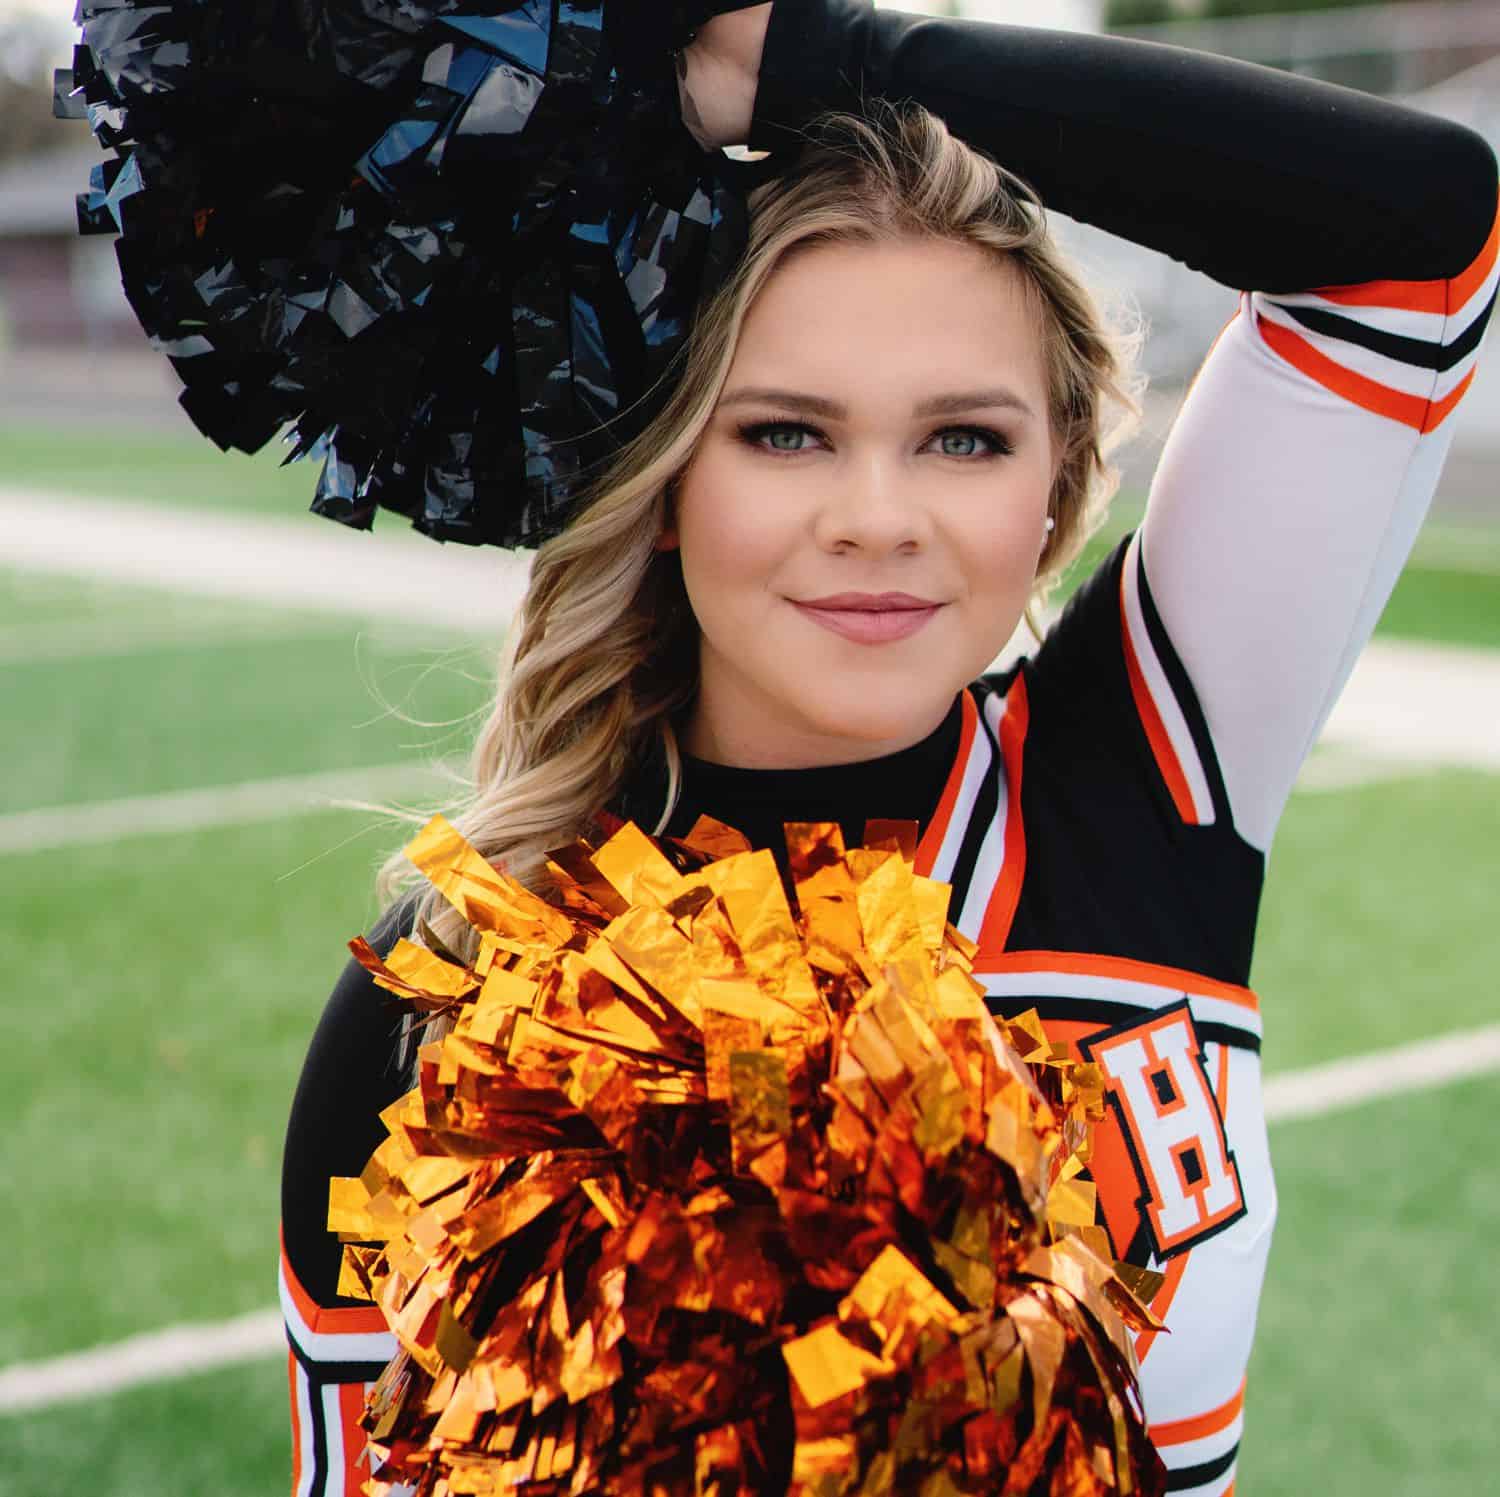 A senior girl cheerleader stands on a football field with her pop-poms on display